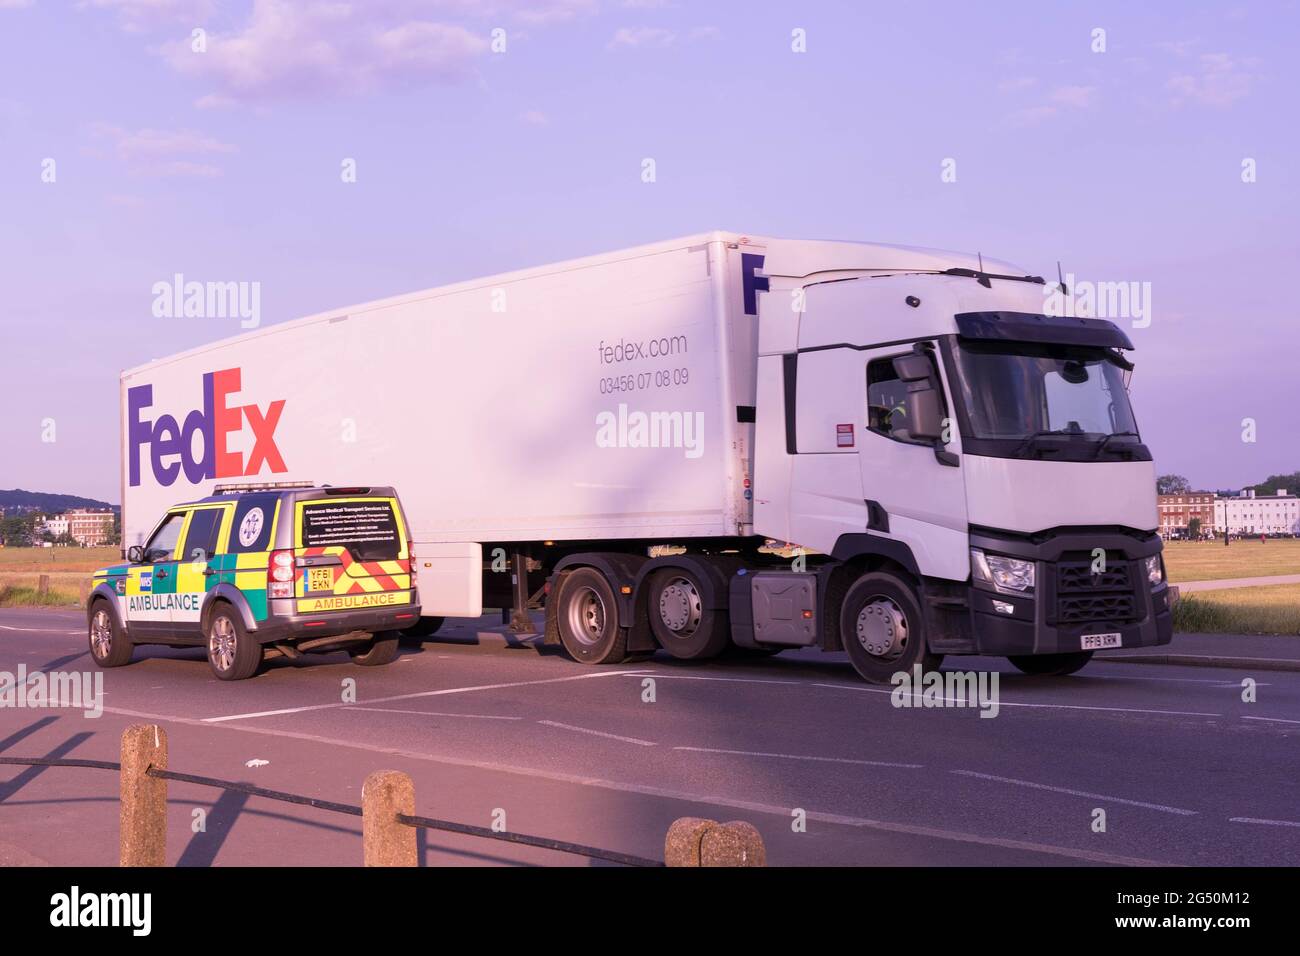 FedEx delivery lorry met London Ambulance at Traffic lights on sunny day, summer, England, UK, Europe Stock Photo